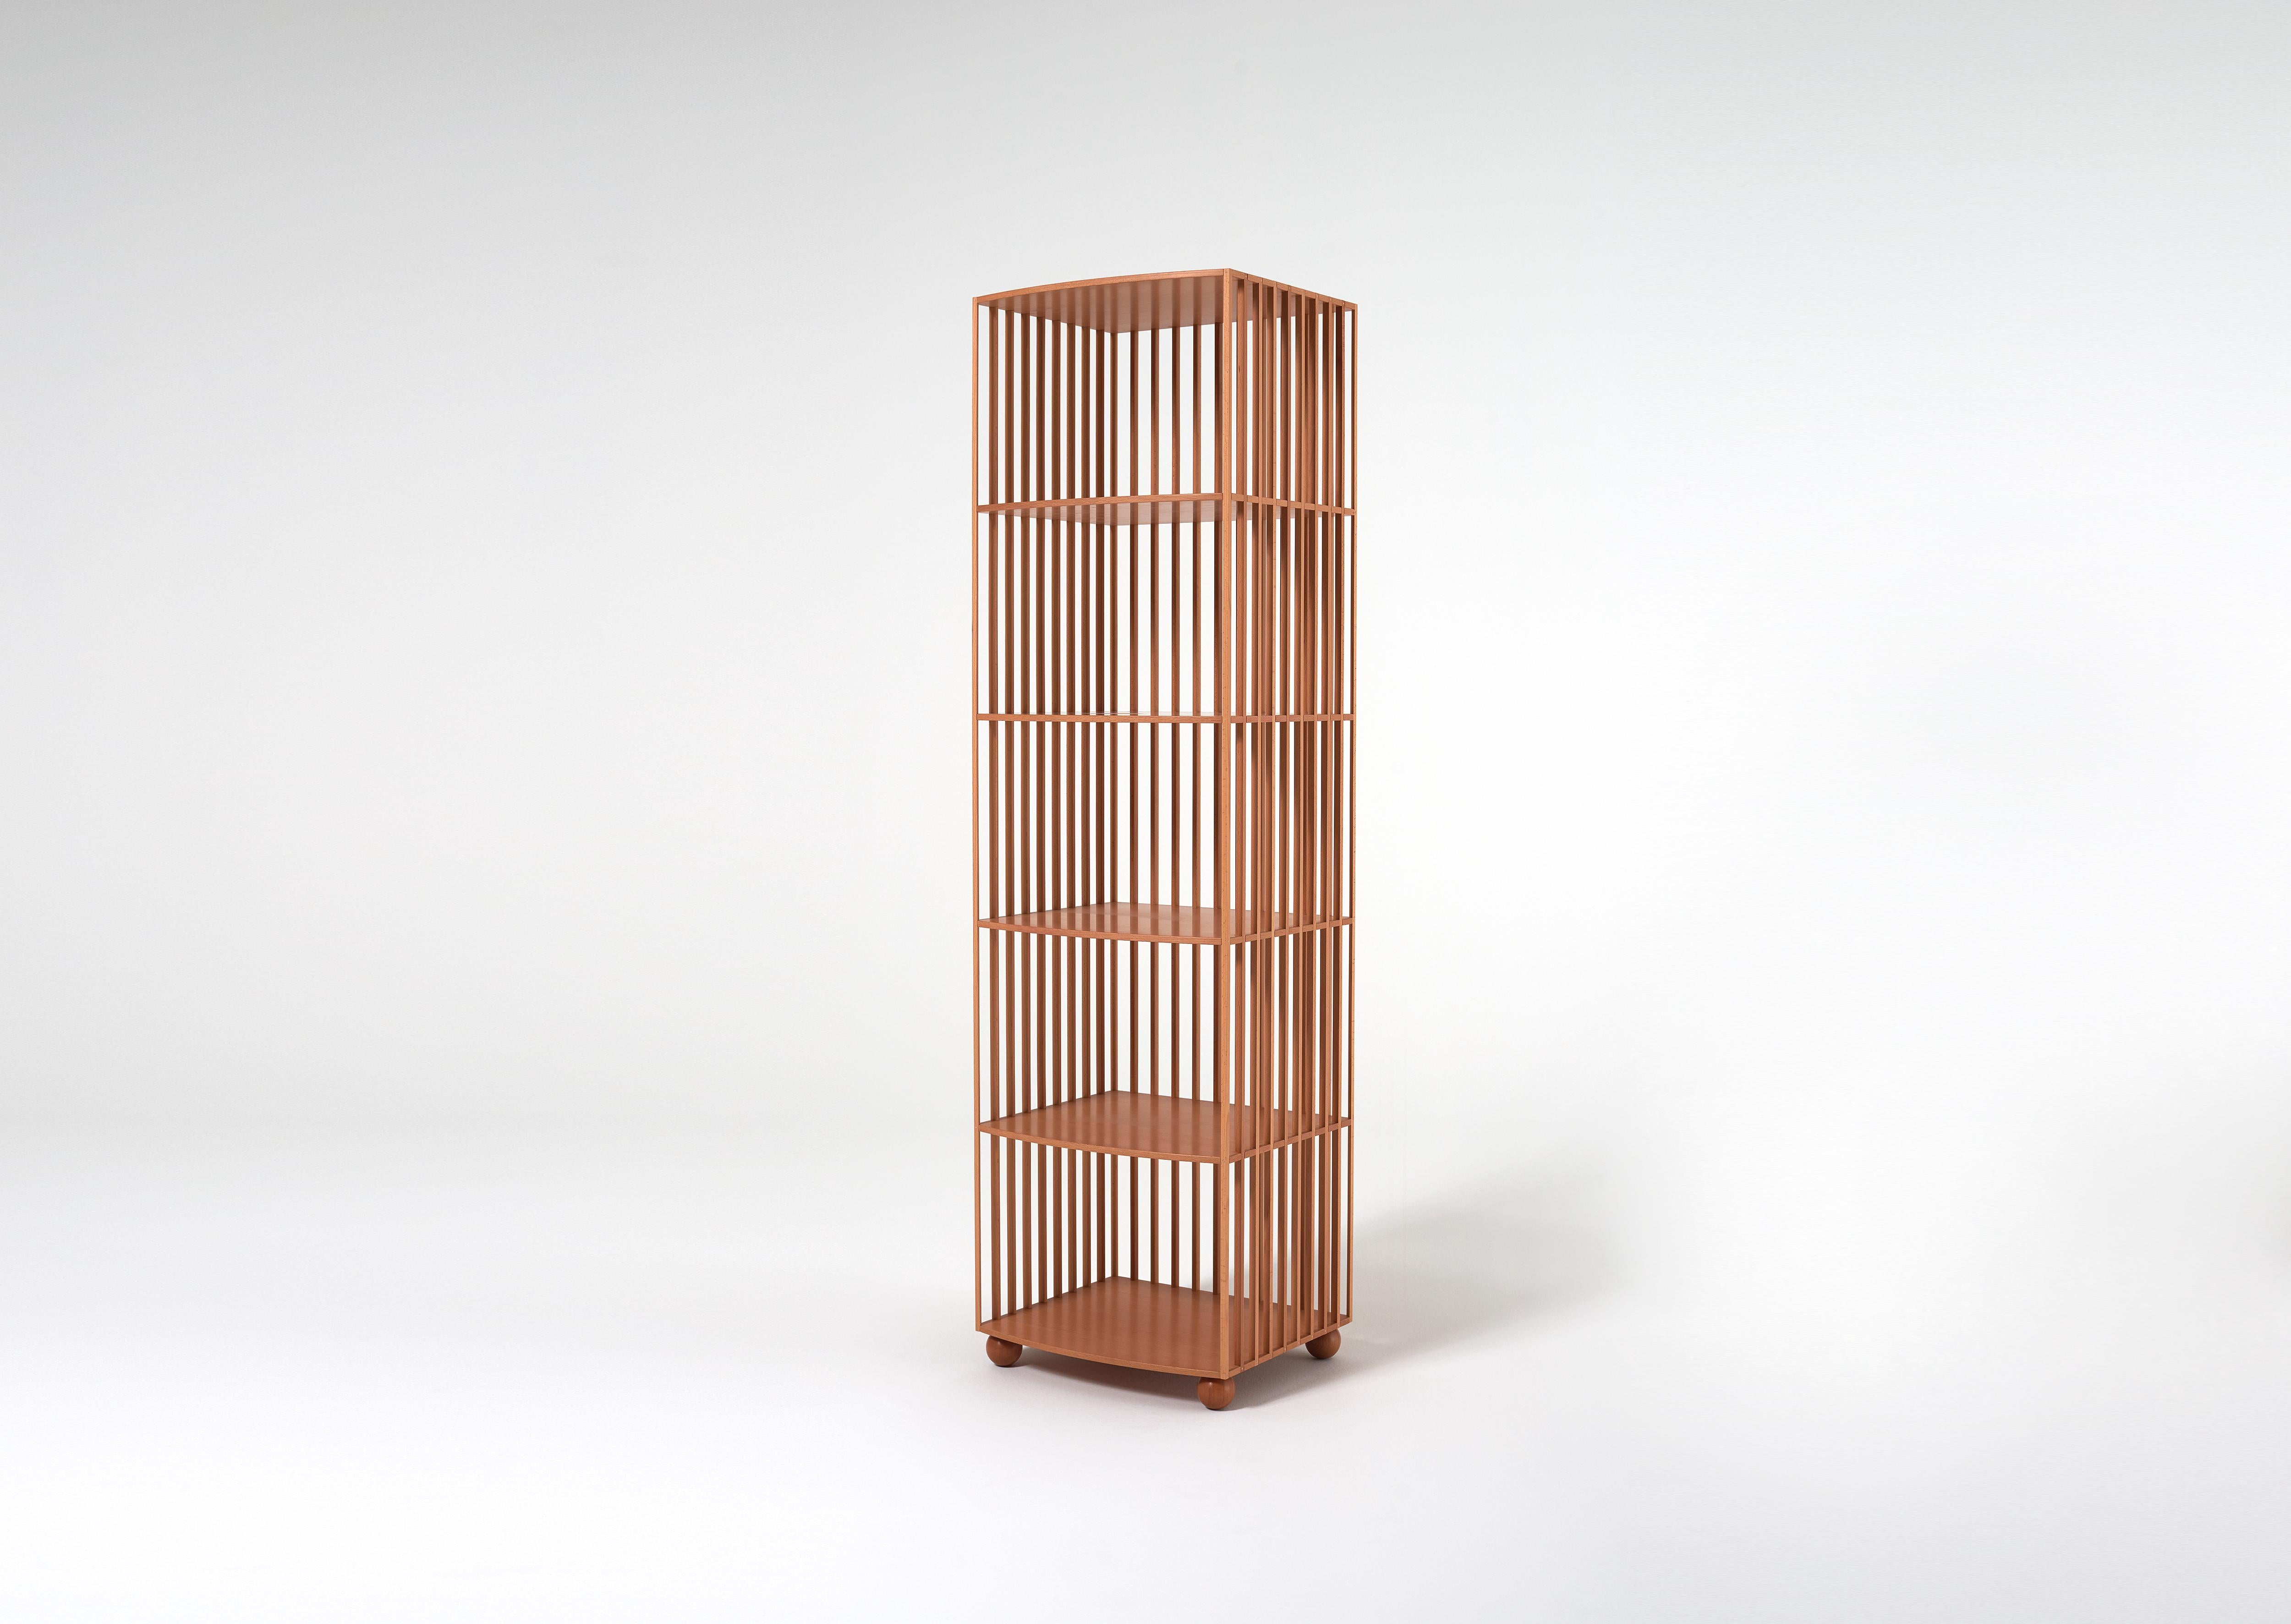 A bookcase designed for the centre of a room, made of a lining of solid-wood baguettes that are rounded off and joined to countertops through invisible joints. The result has impressive structural strength while looking light and airy. With